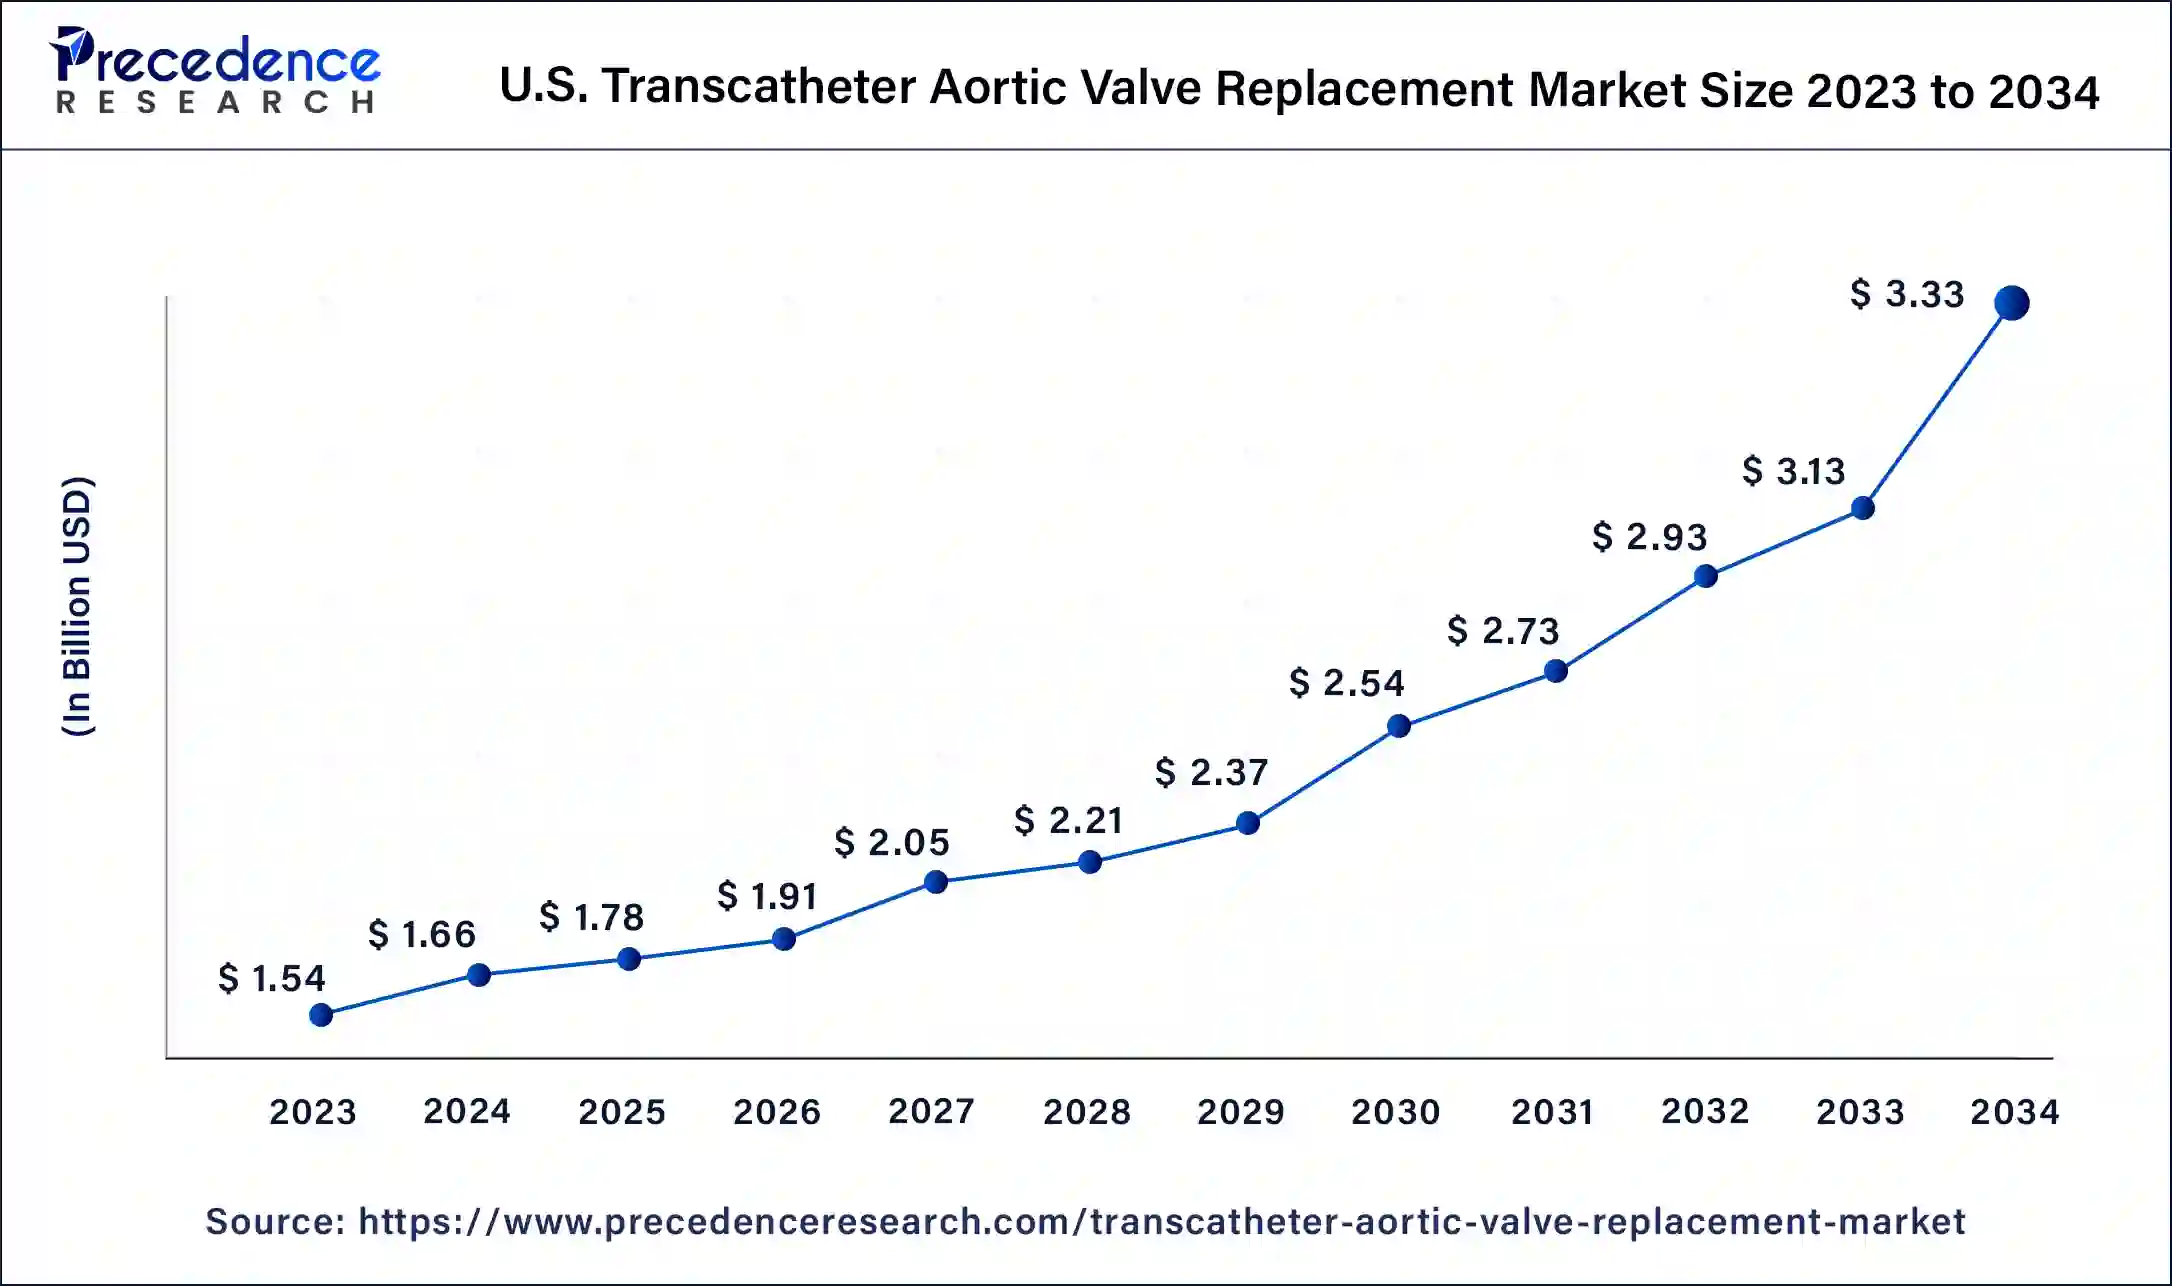 U.S. Transcatheter Aortic Valve Replacement Market Size 2024 To 2034